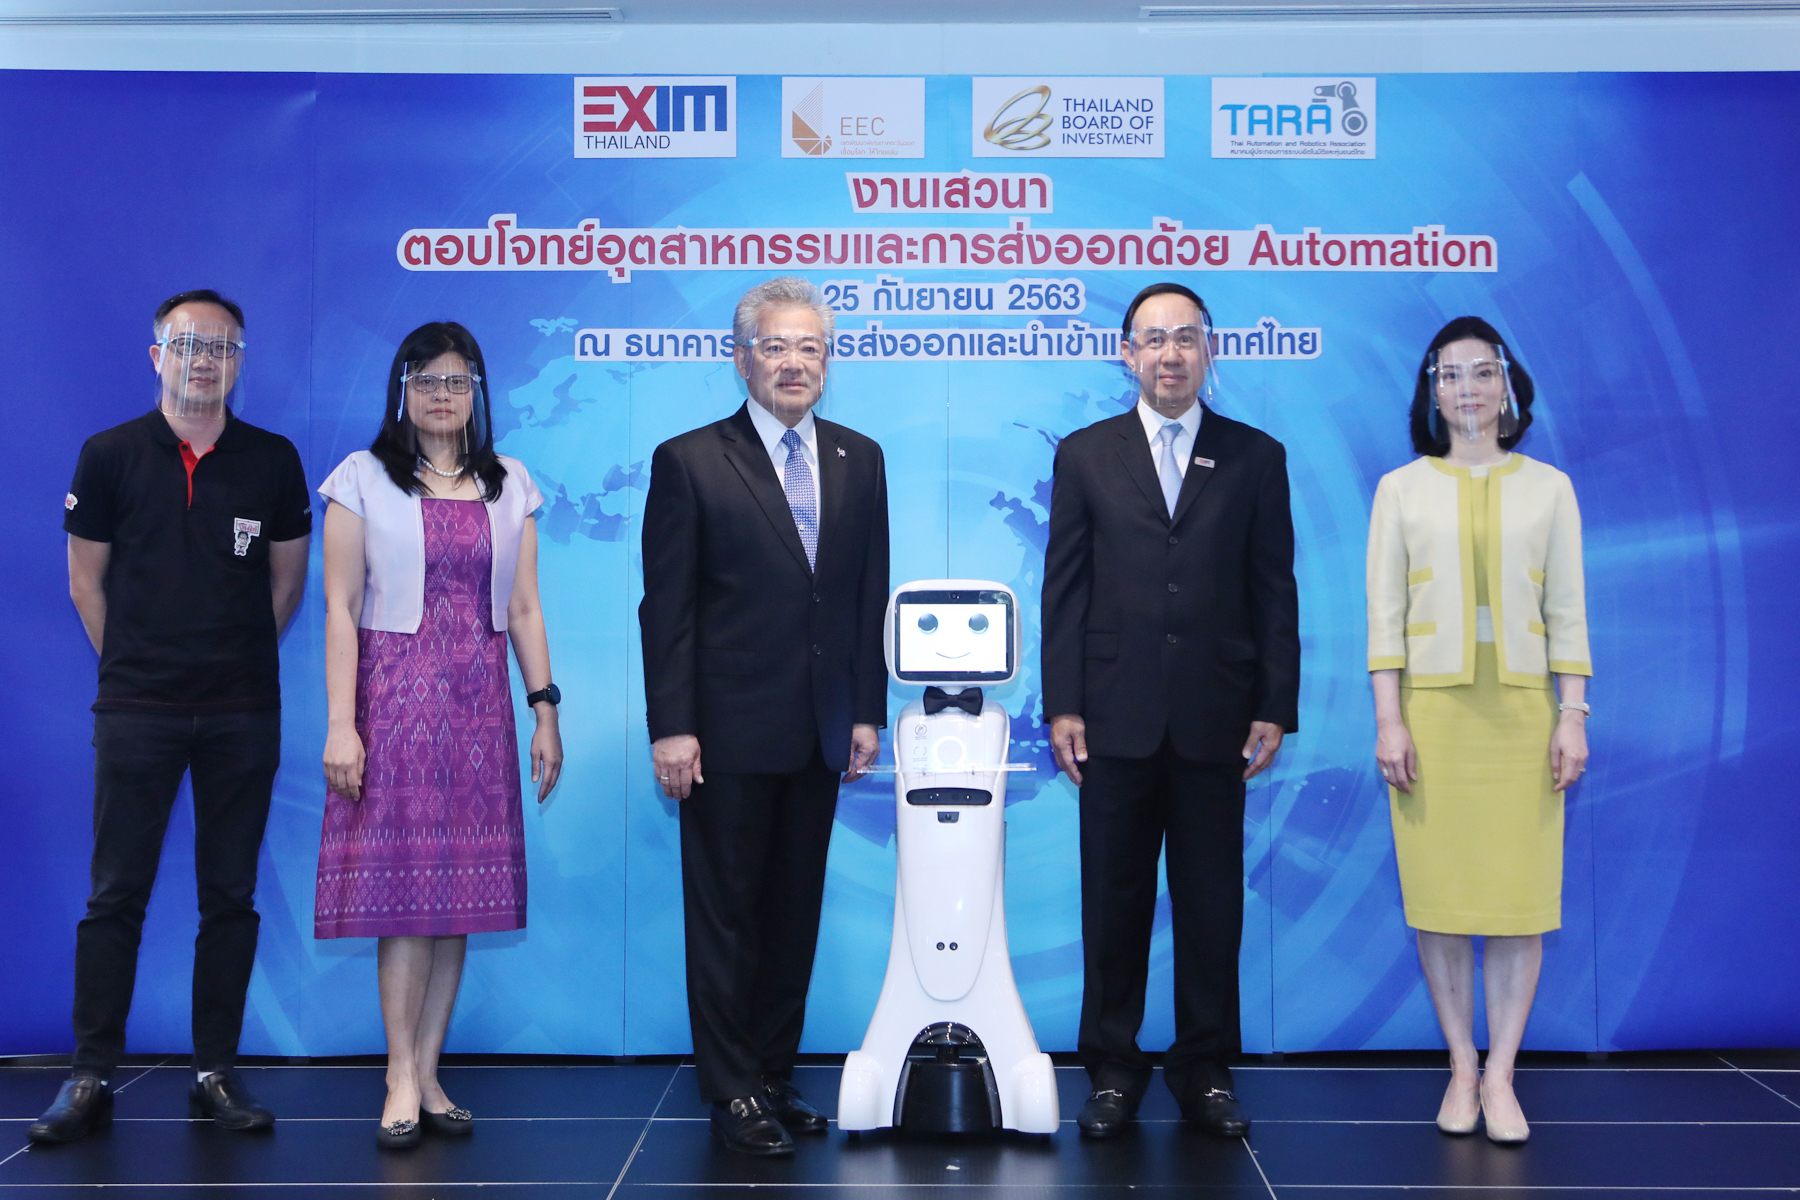 EXIM Thailand Joins Hands with Public and Private Sectors to Promote Usage of Robotics and Automation in Export Production, Particularly in EEC